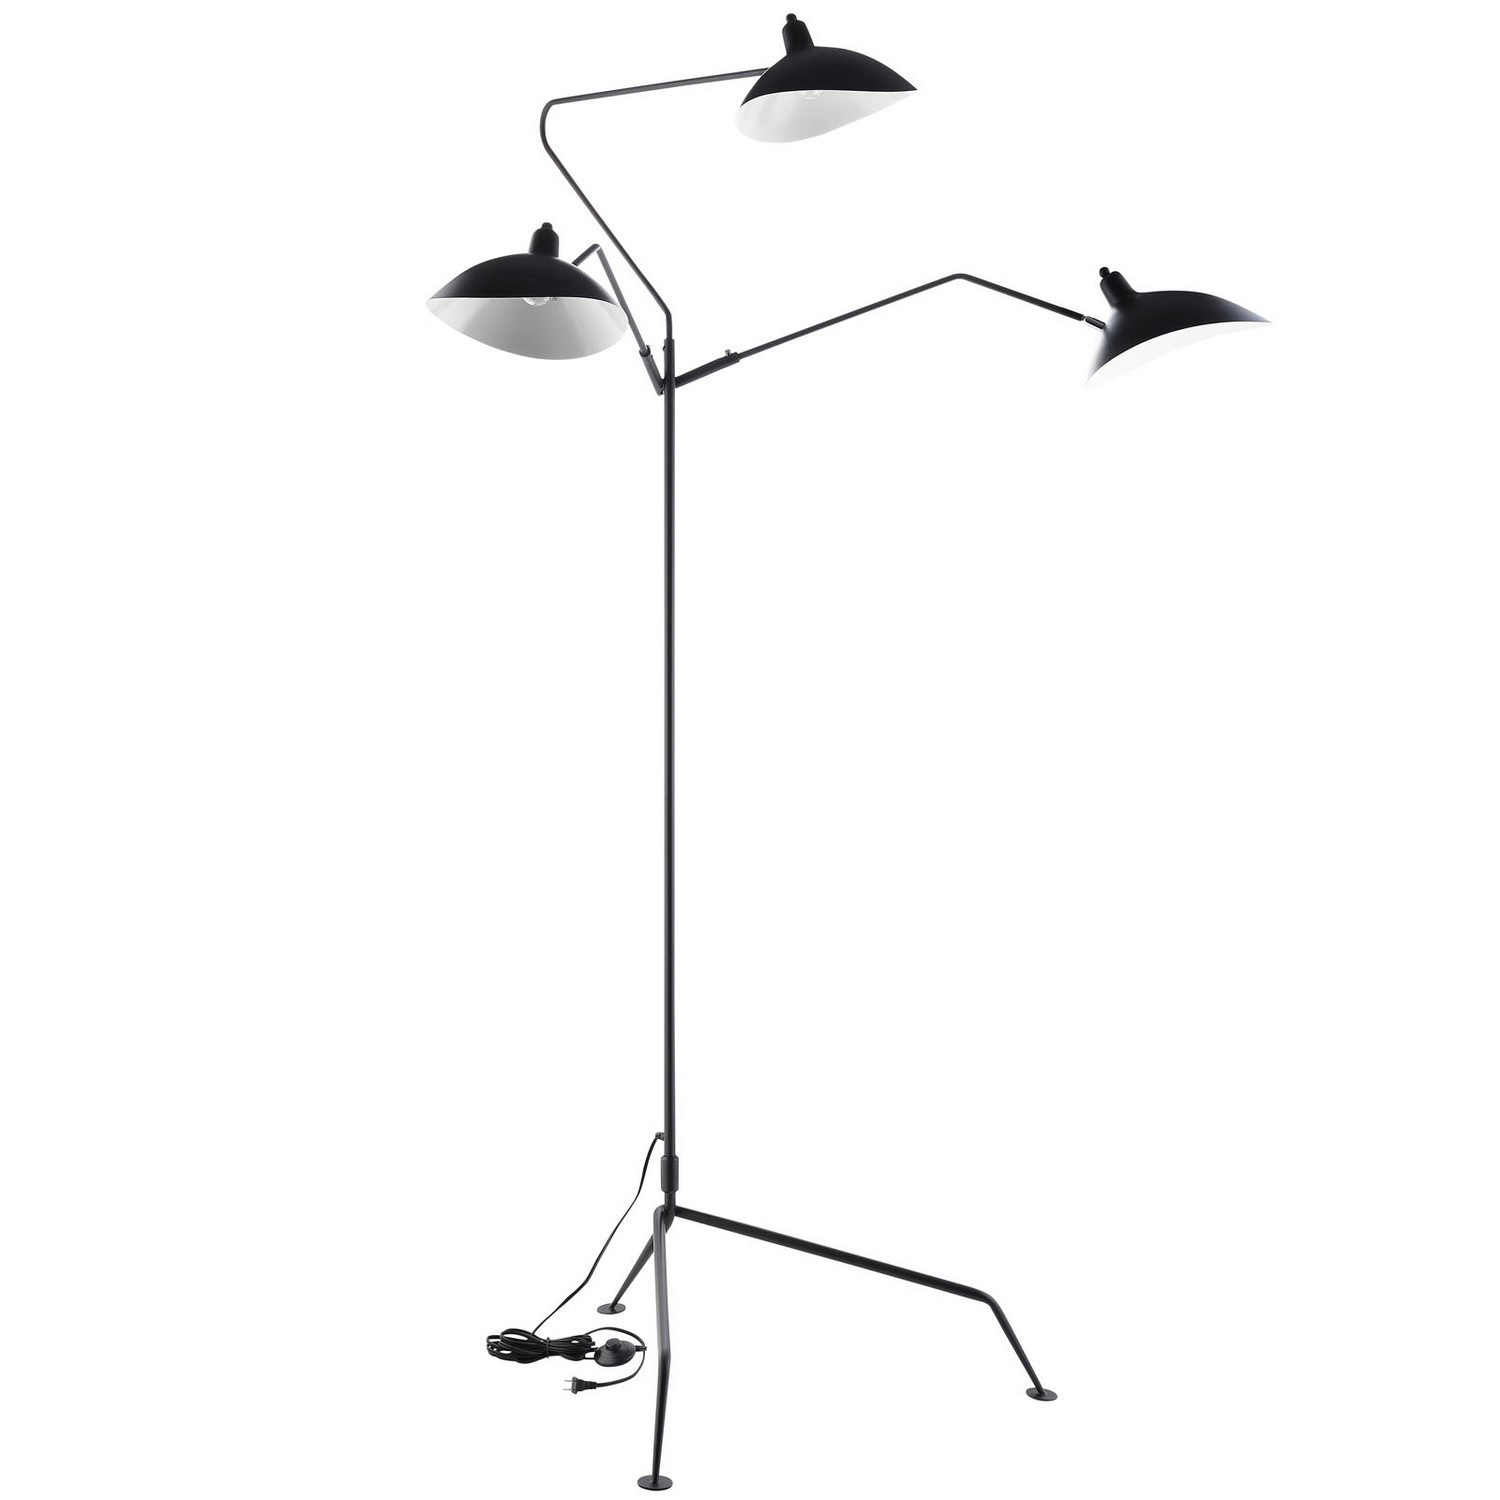 Modway View Stainless Steel Floor Lamp - Black